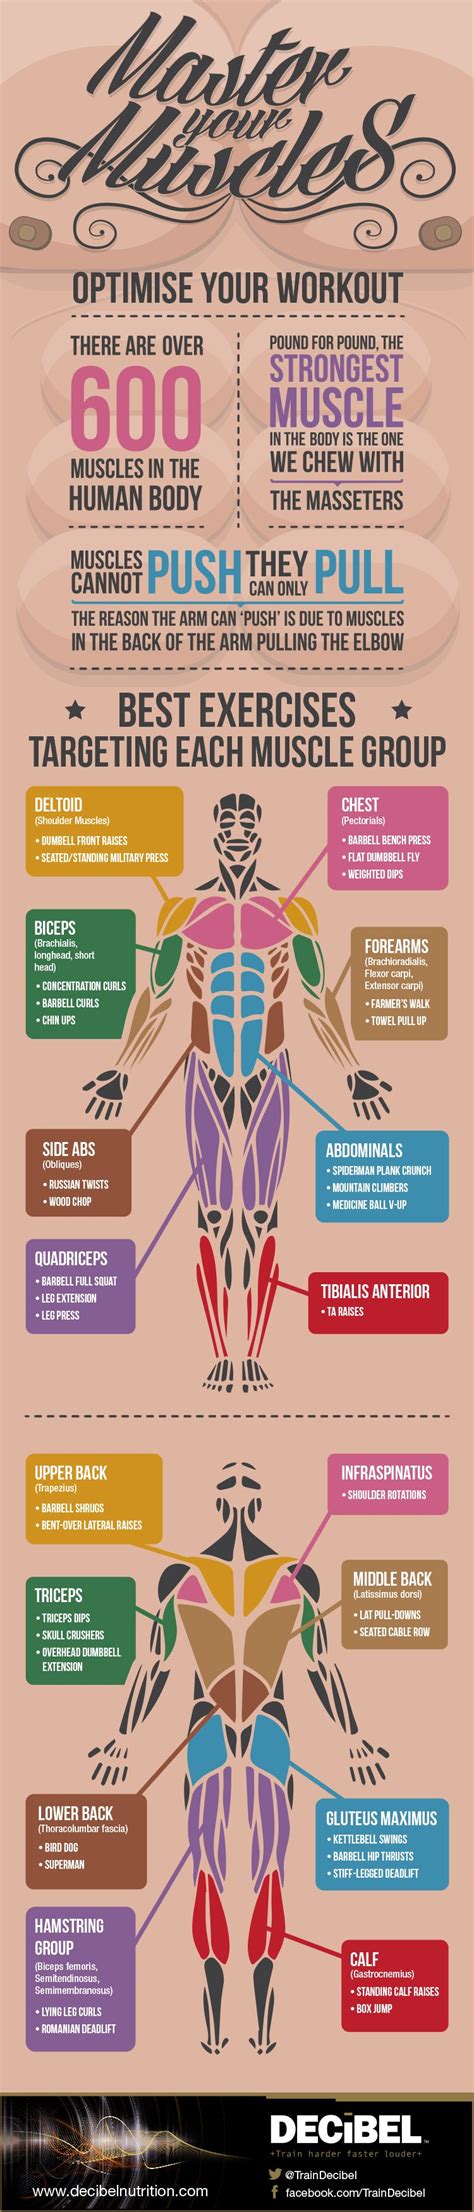 The Best Exercises For Each Muscle Group Infographic Combat Sports